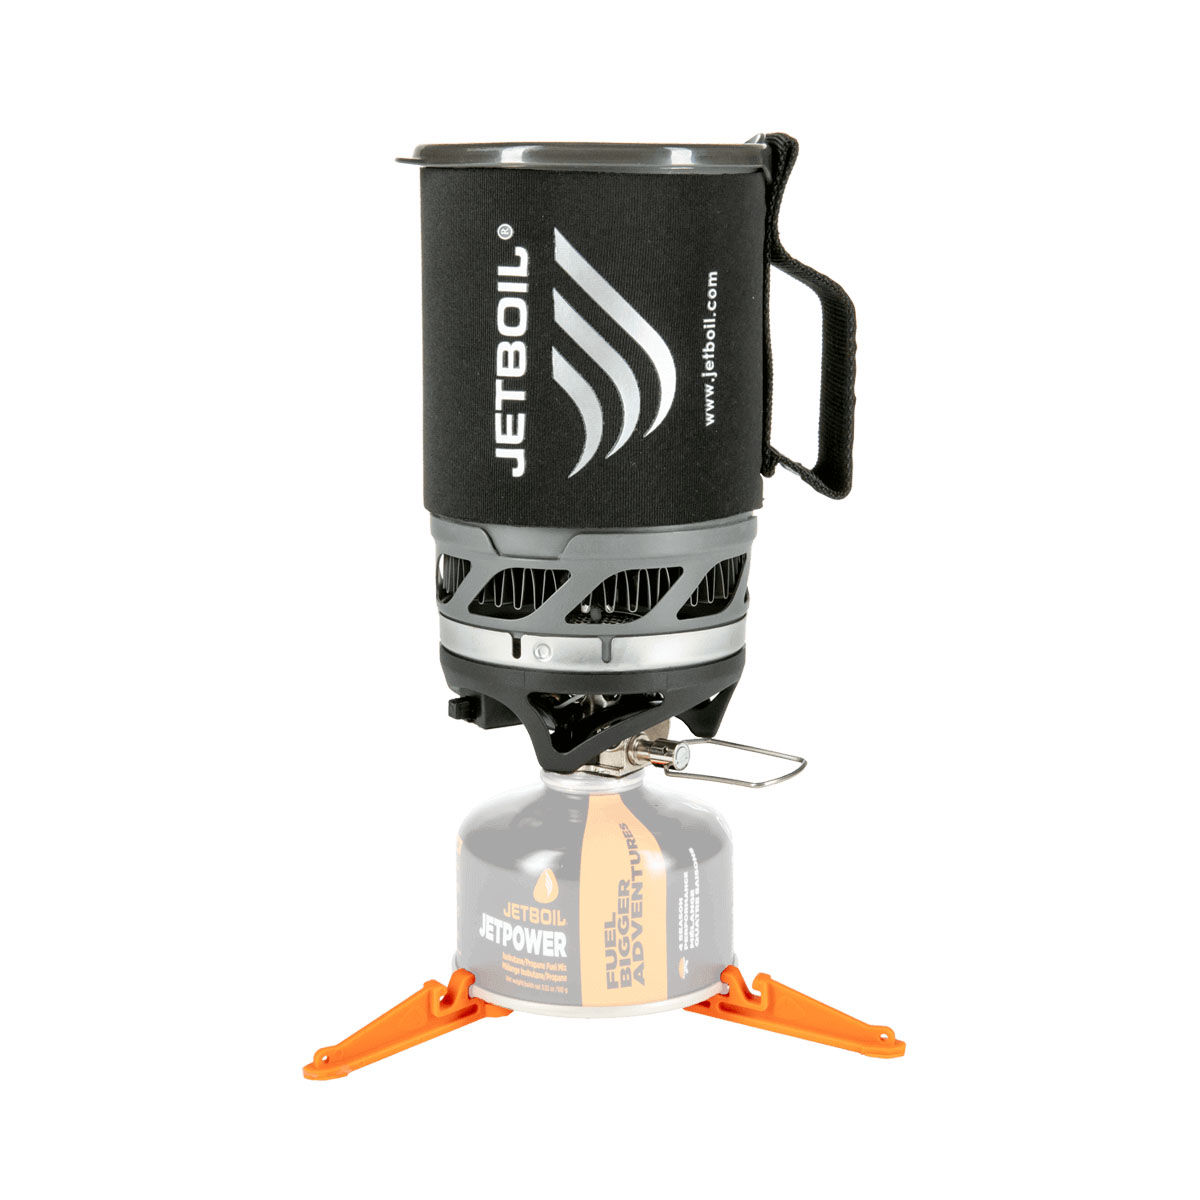 Jetboil MicroMo - 1L gas-regulated cooking system - Carbon